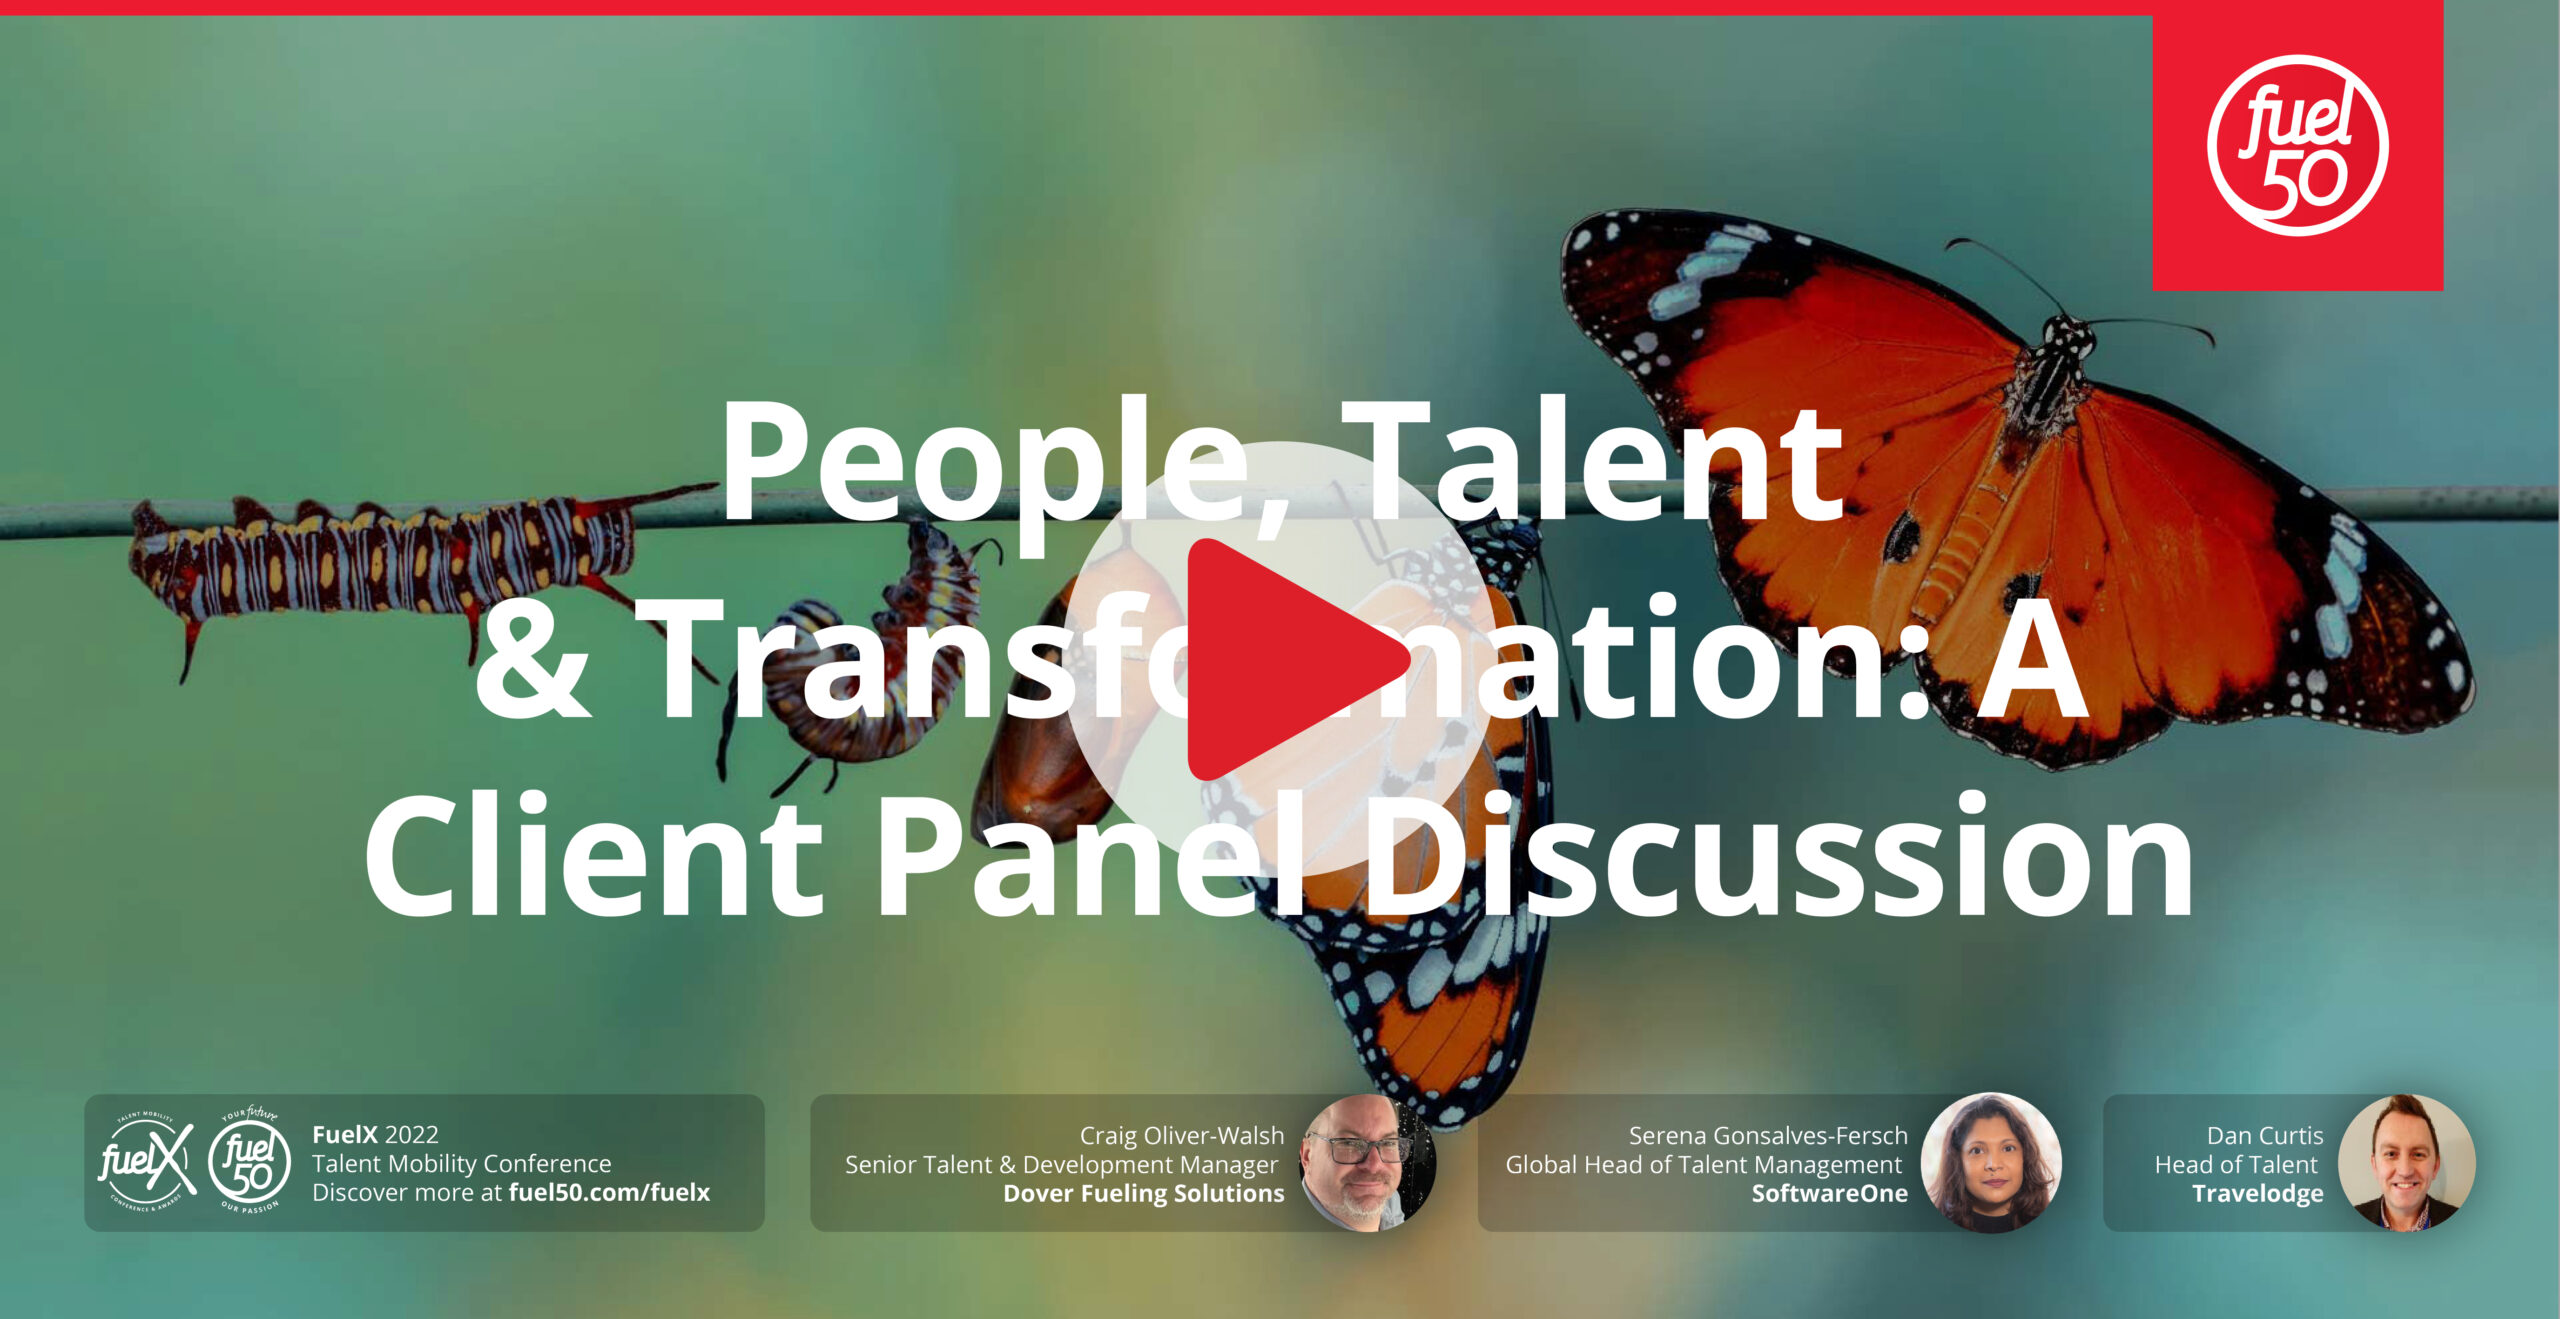 People, Talent & Transformation: Empowering Your People to Learn and Grow